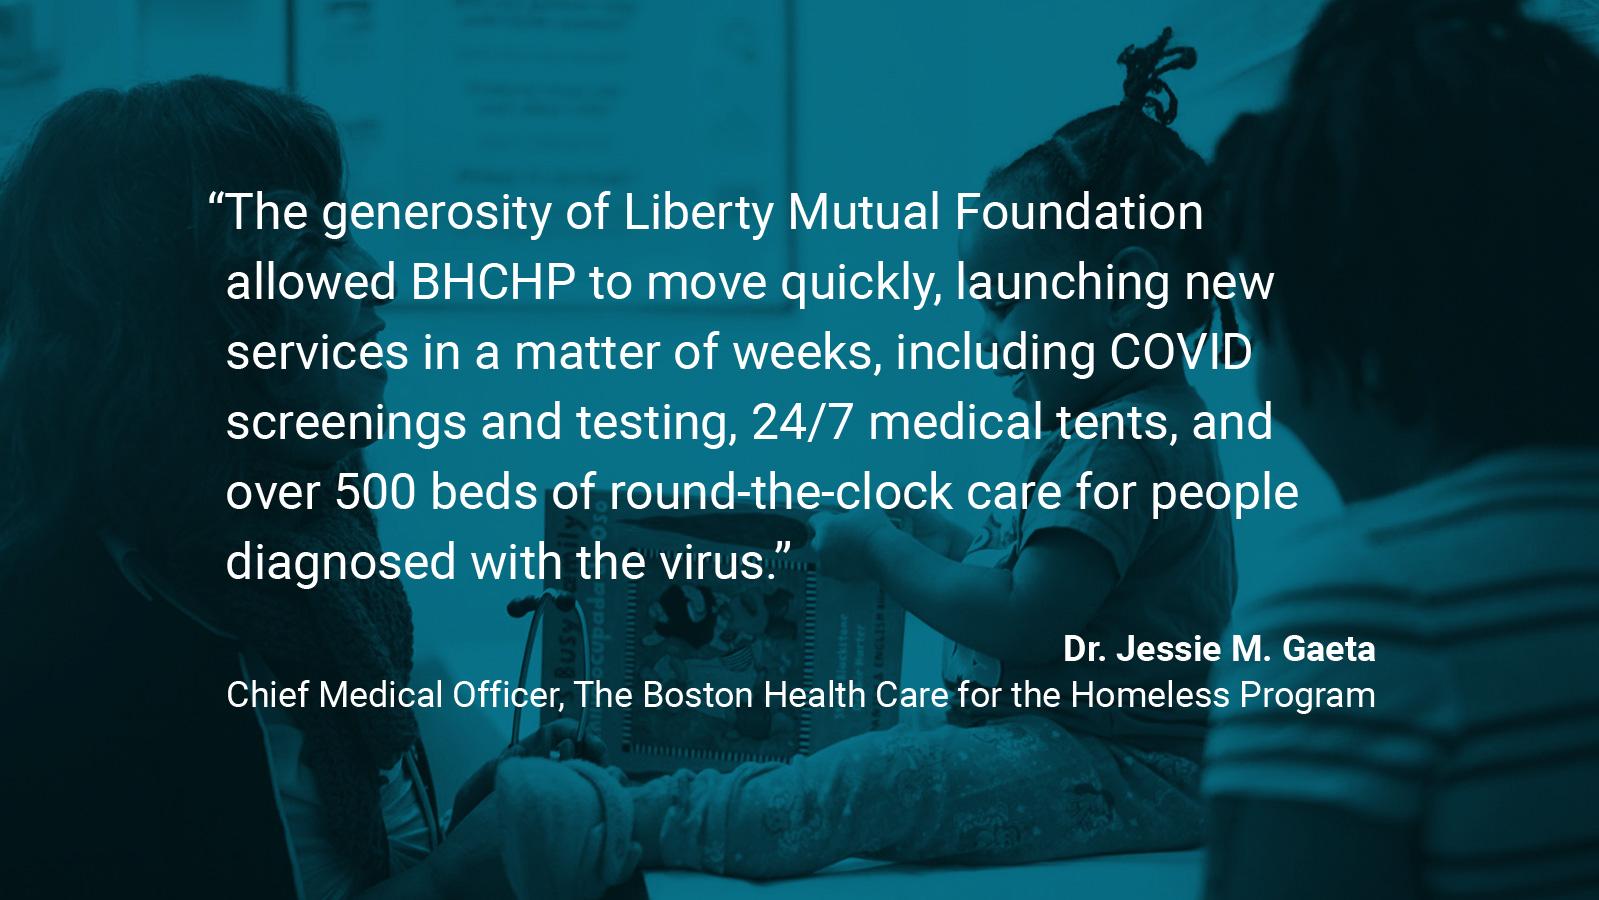 (slide 3 of 4) Quote by: Dr. Jessie M. Gaeta, Chief Medical Officer at Boston Health Care for the Homeless: "The generosity of Liberty Mutual Foundation allowed BHCHP to move quickly, launching new services in a matter of weeks, including COVID screenings and testing, 24/7 medical tents, and over 500 beds of round-the-clock care for people diagnosed with the virus.” . 